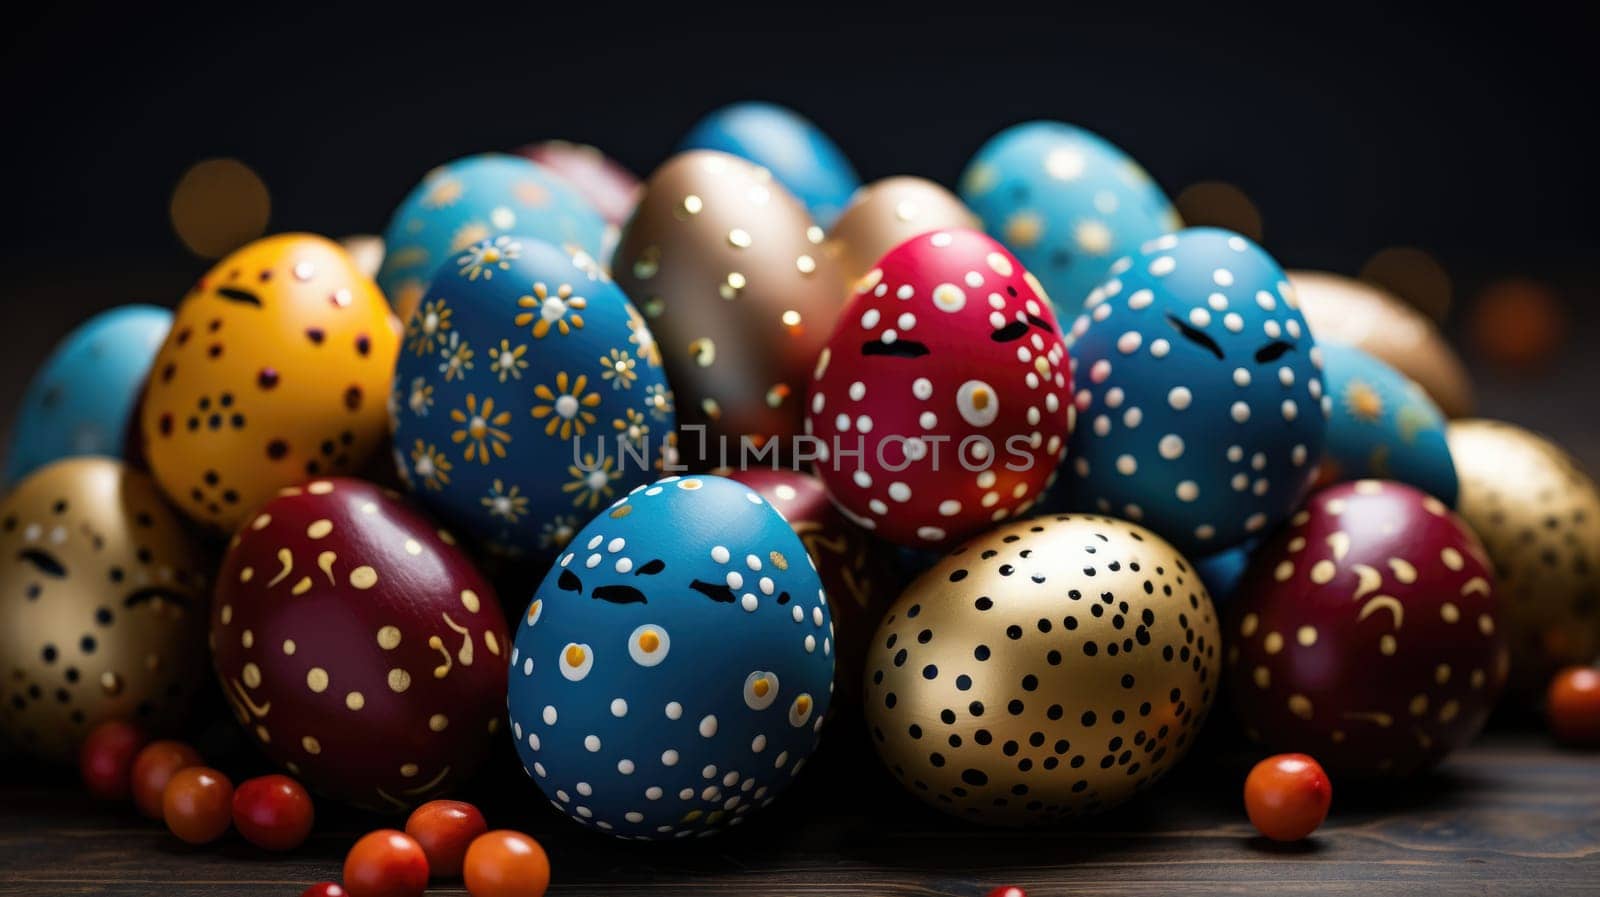 Colorful Painted Eggs Piled on Table by but_photo